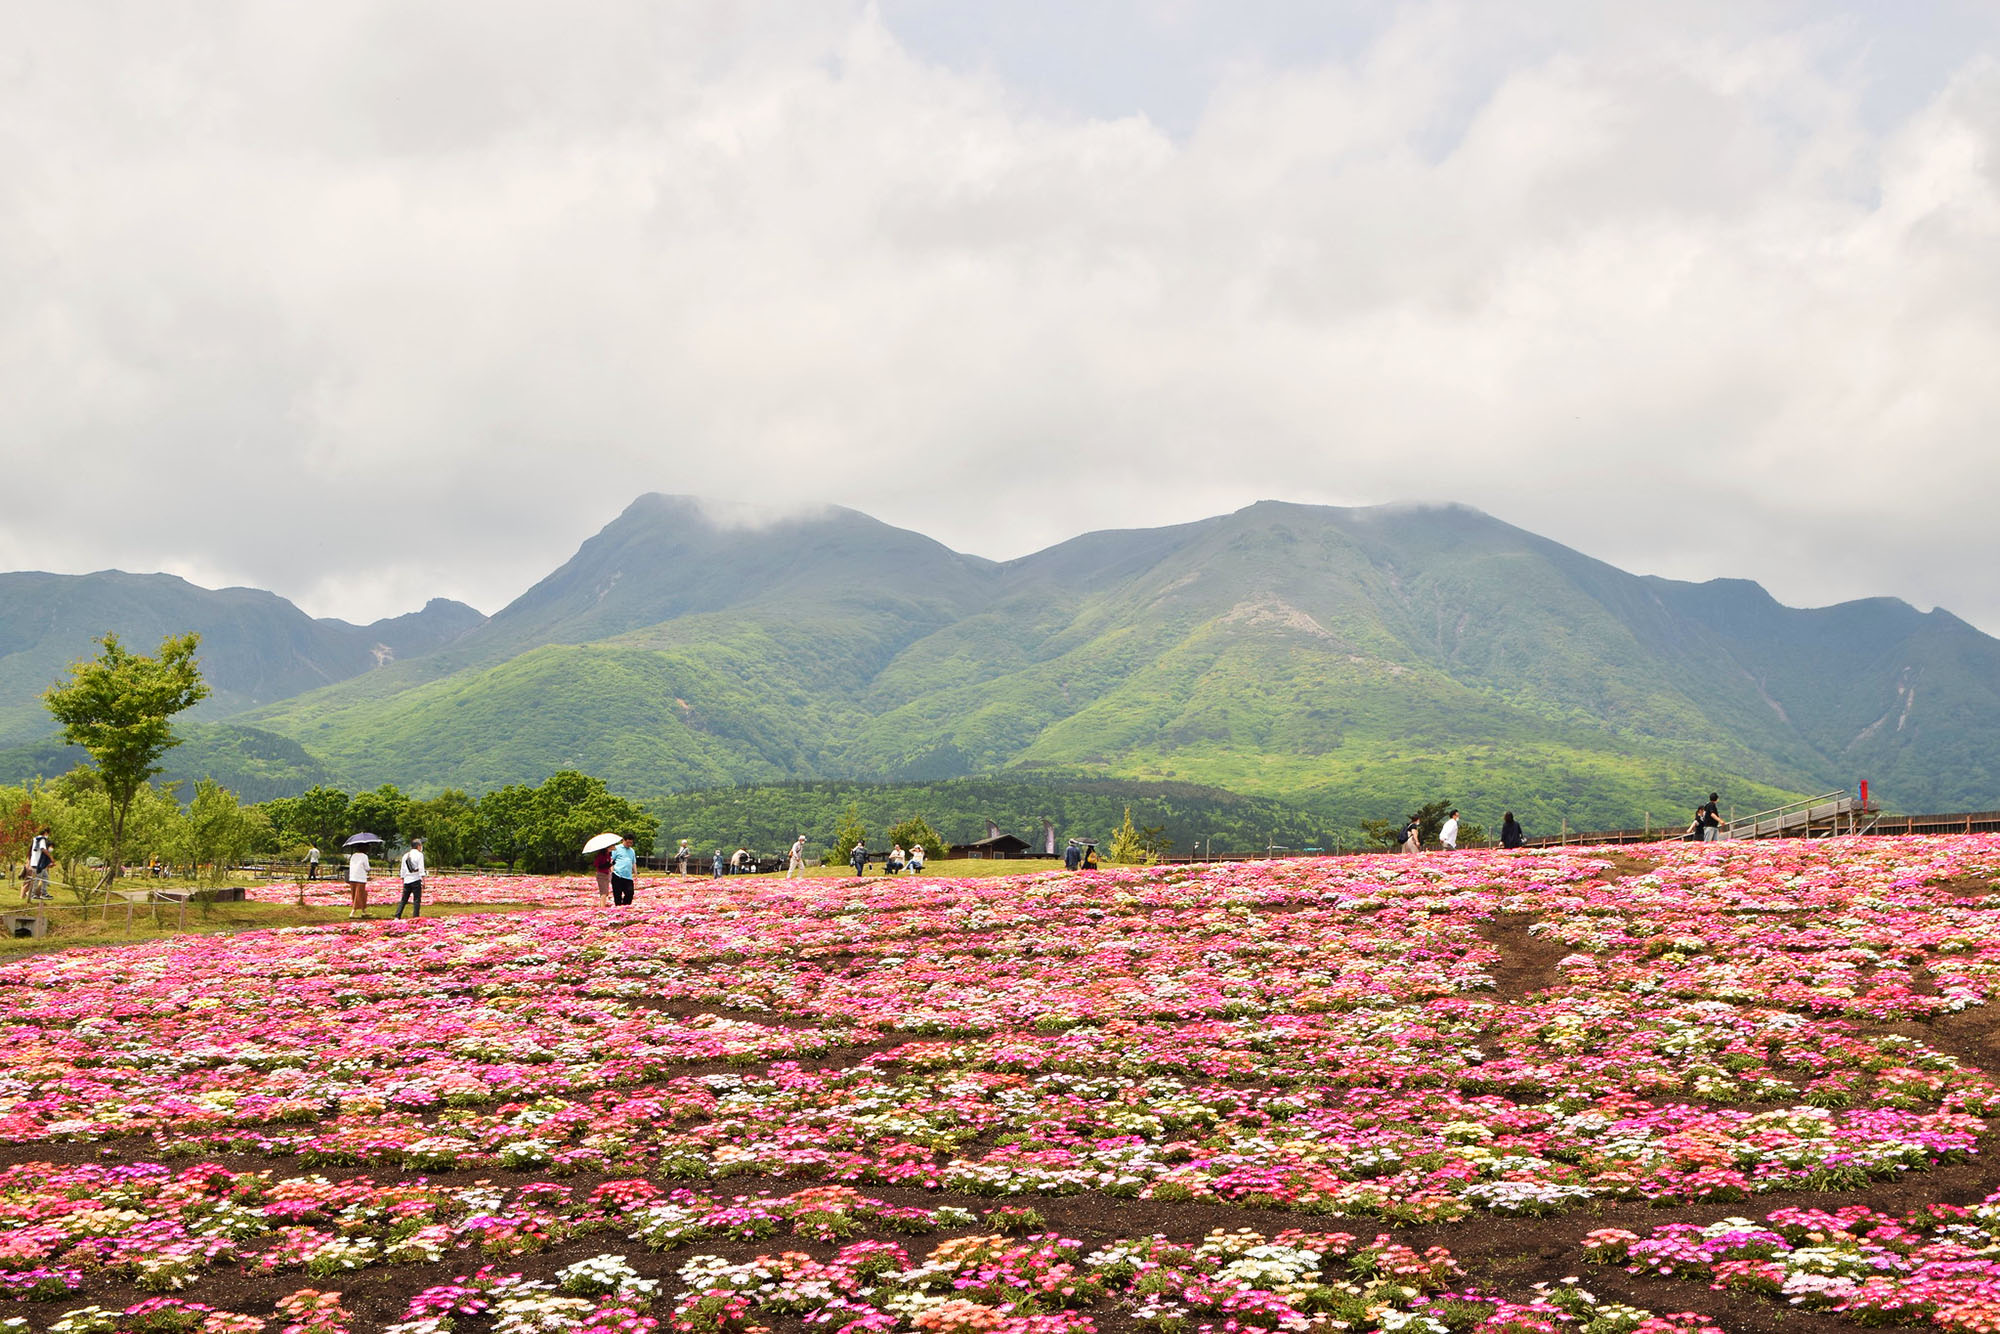 A field of pink flowers in front of a mountain.